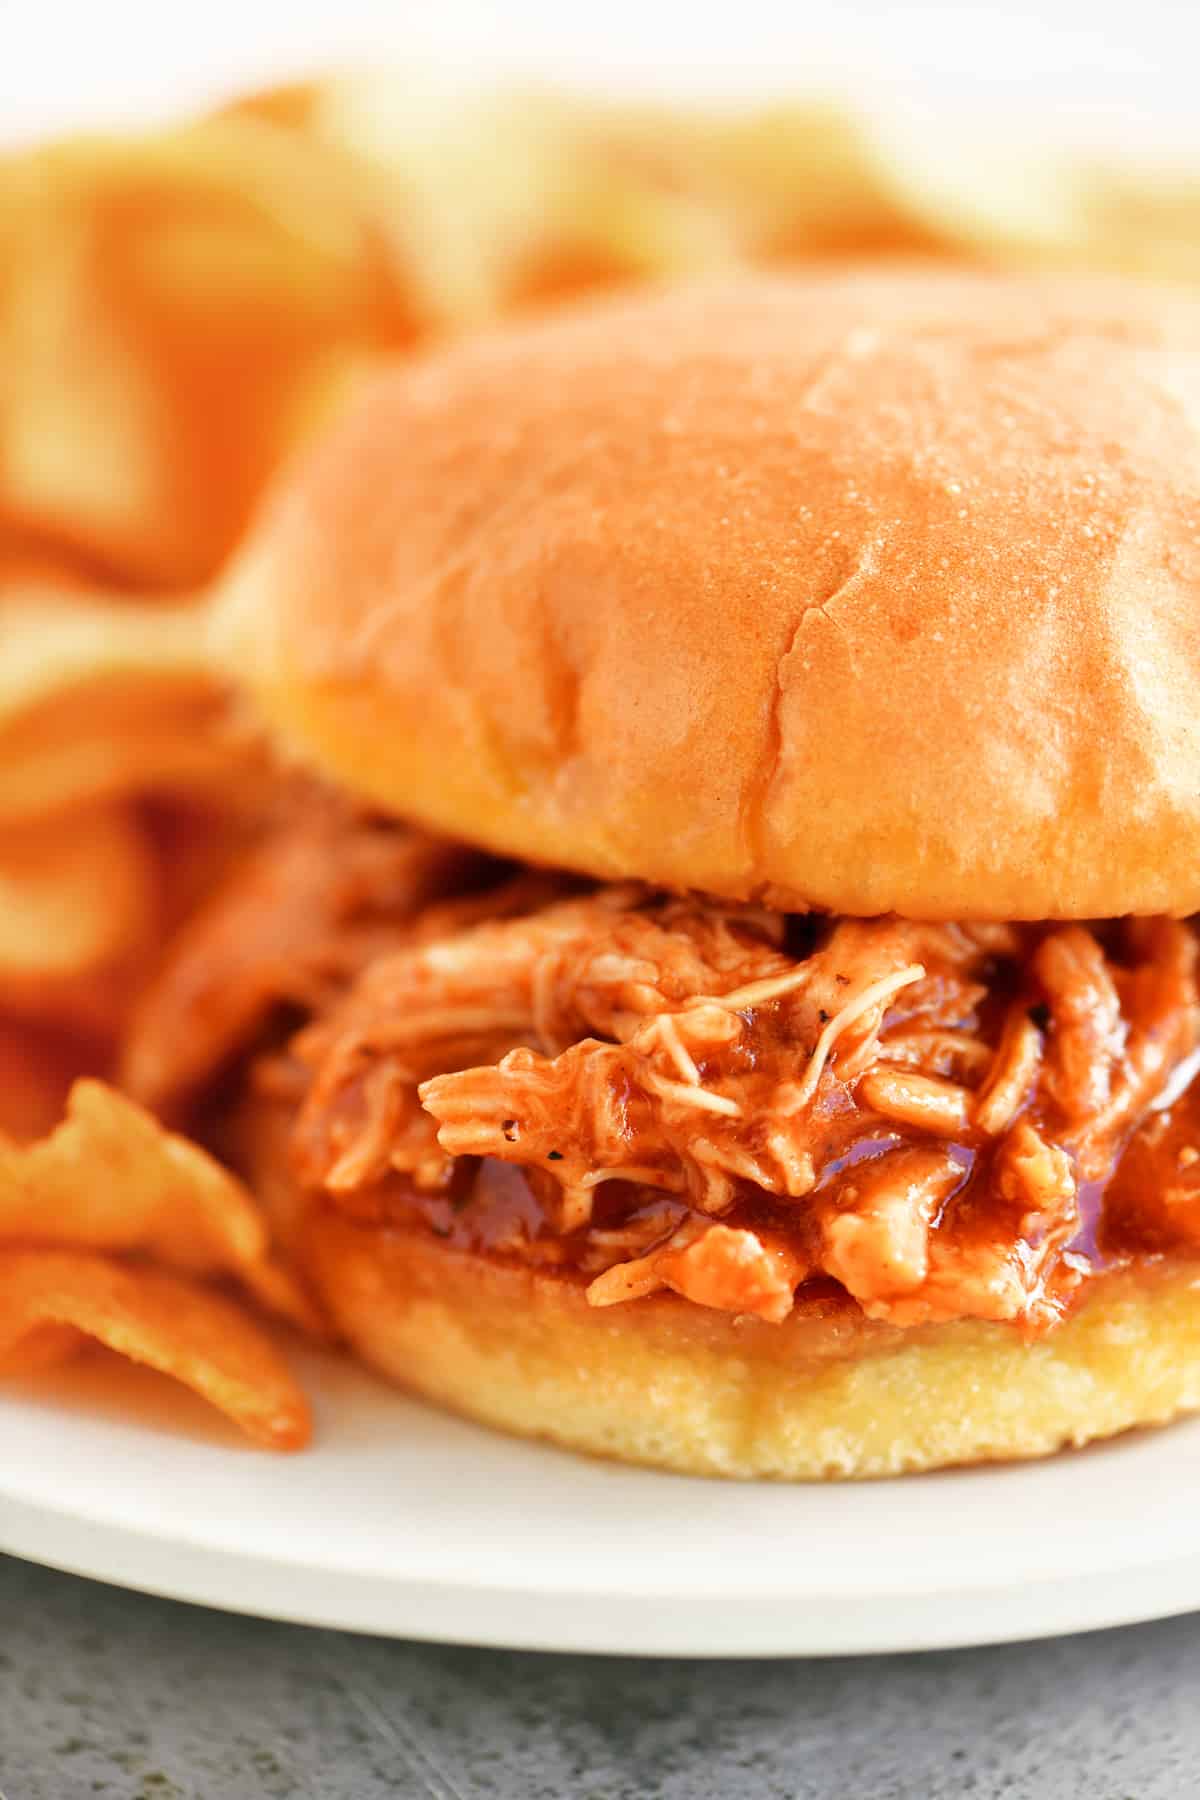 barbecue chicken sandwich on a plate with chips.